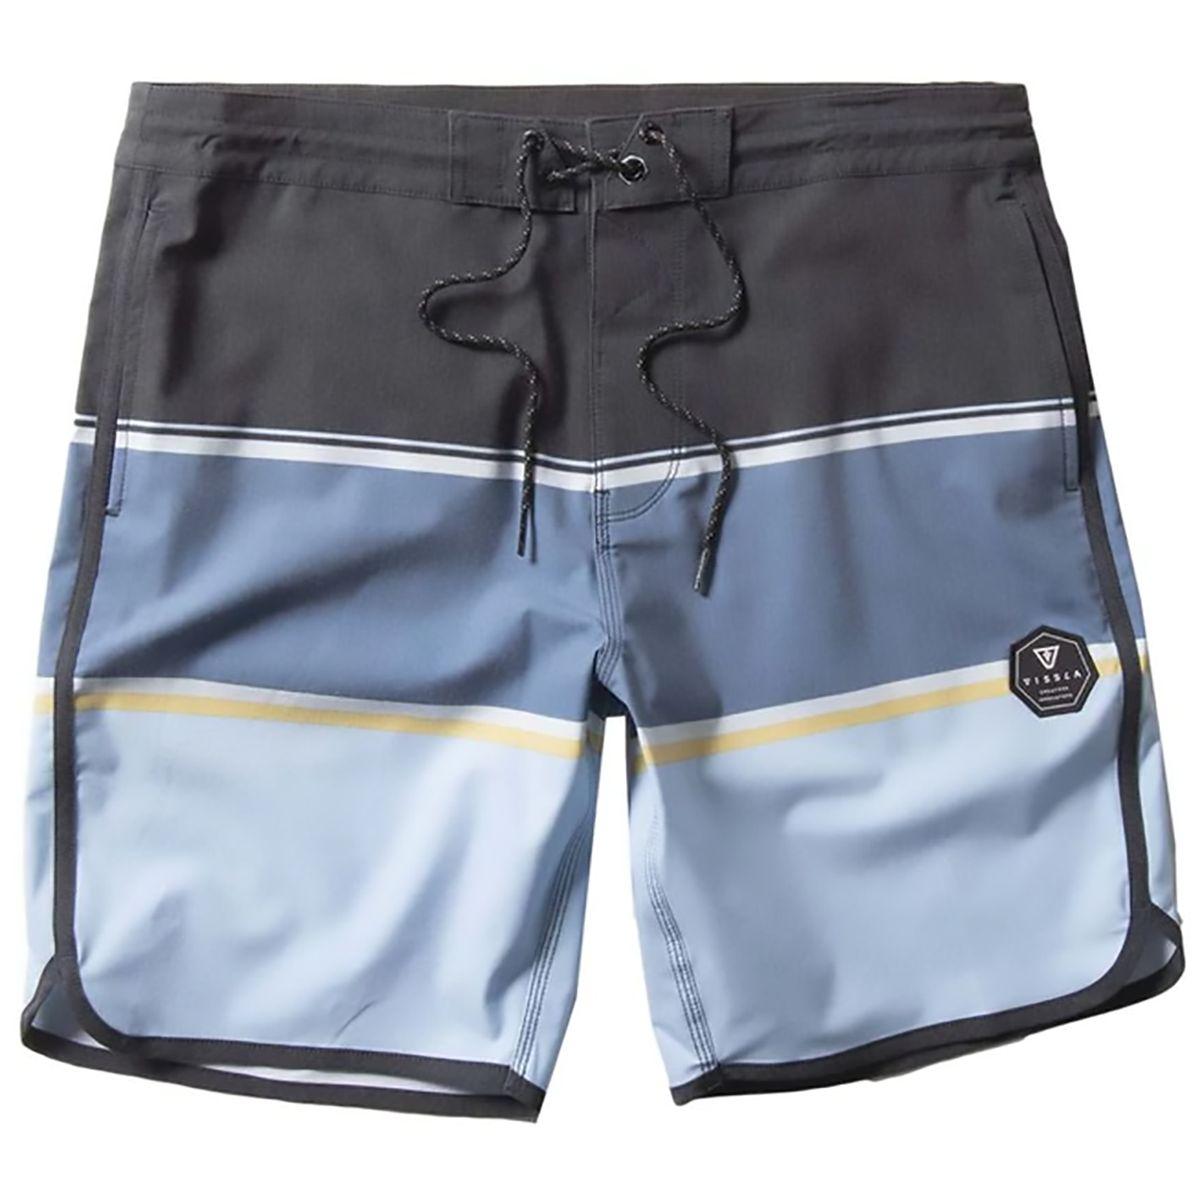 Boardshorts The Point 19.5 BS